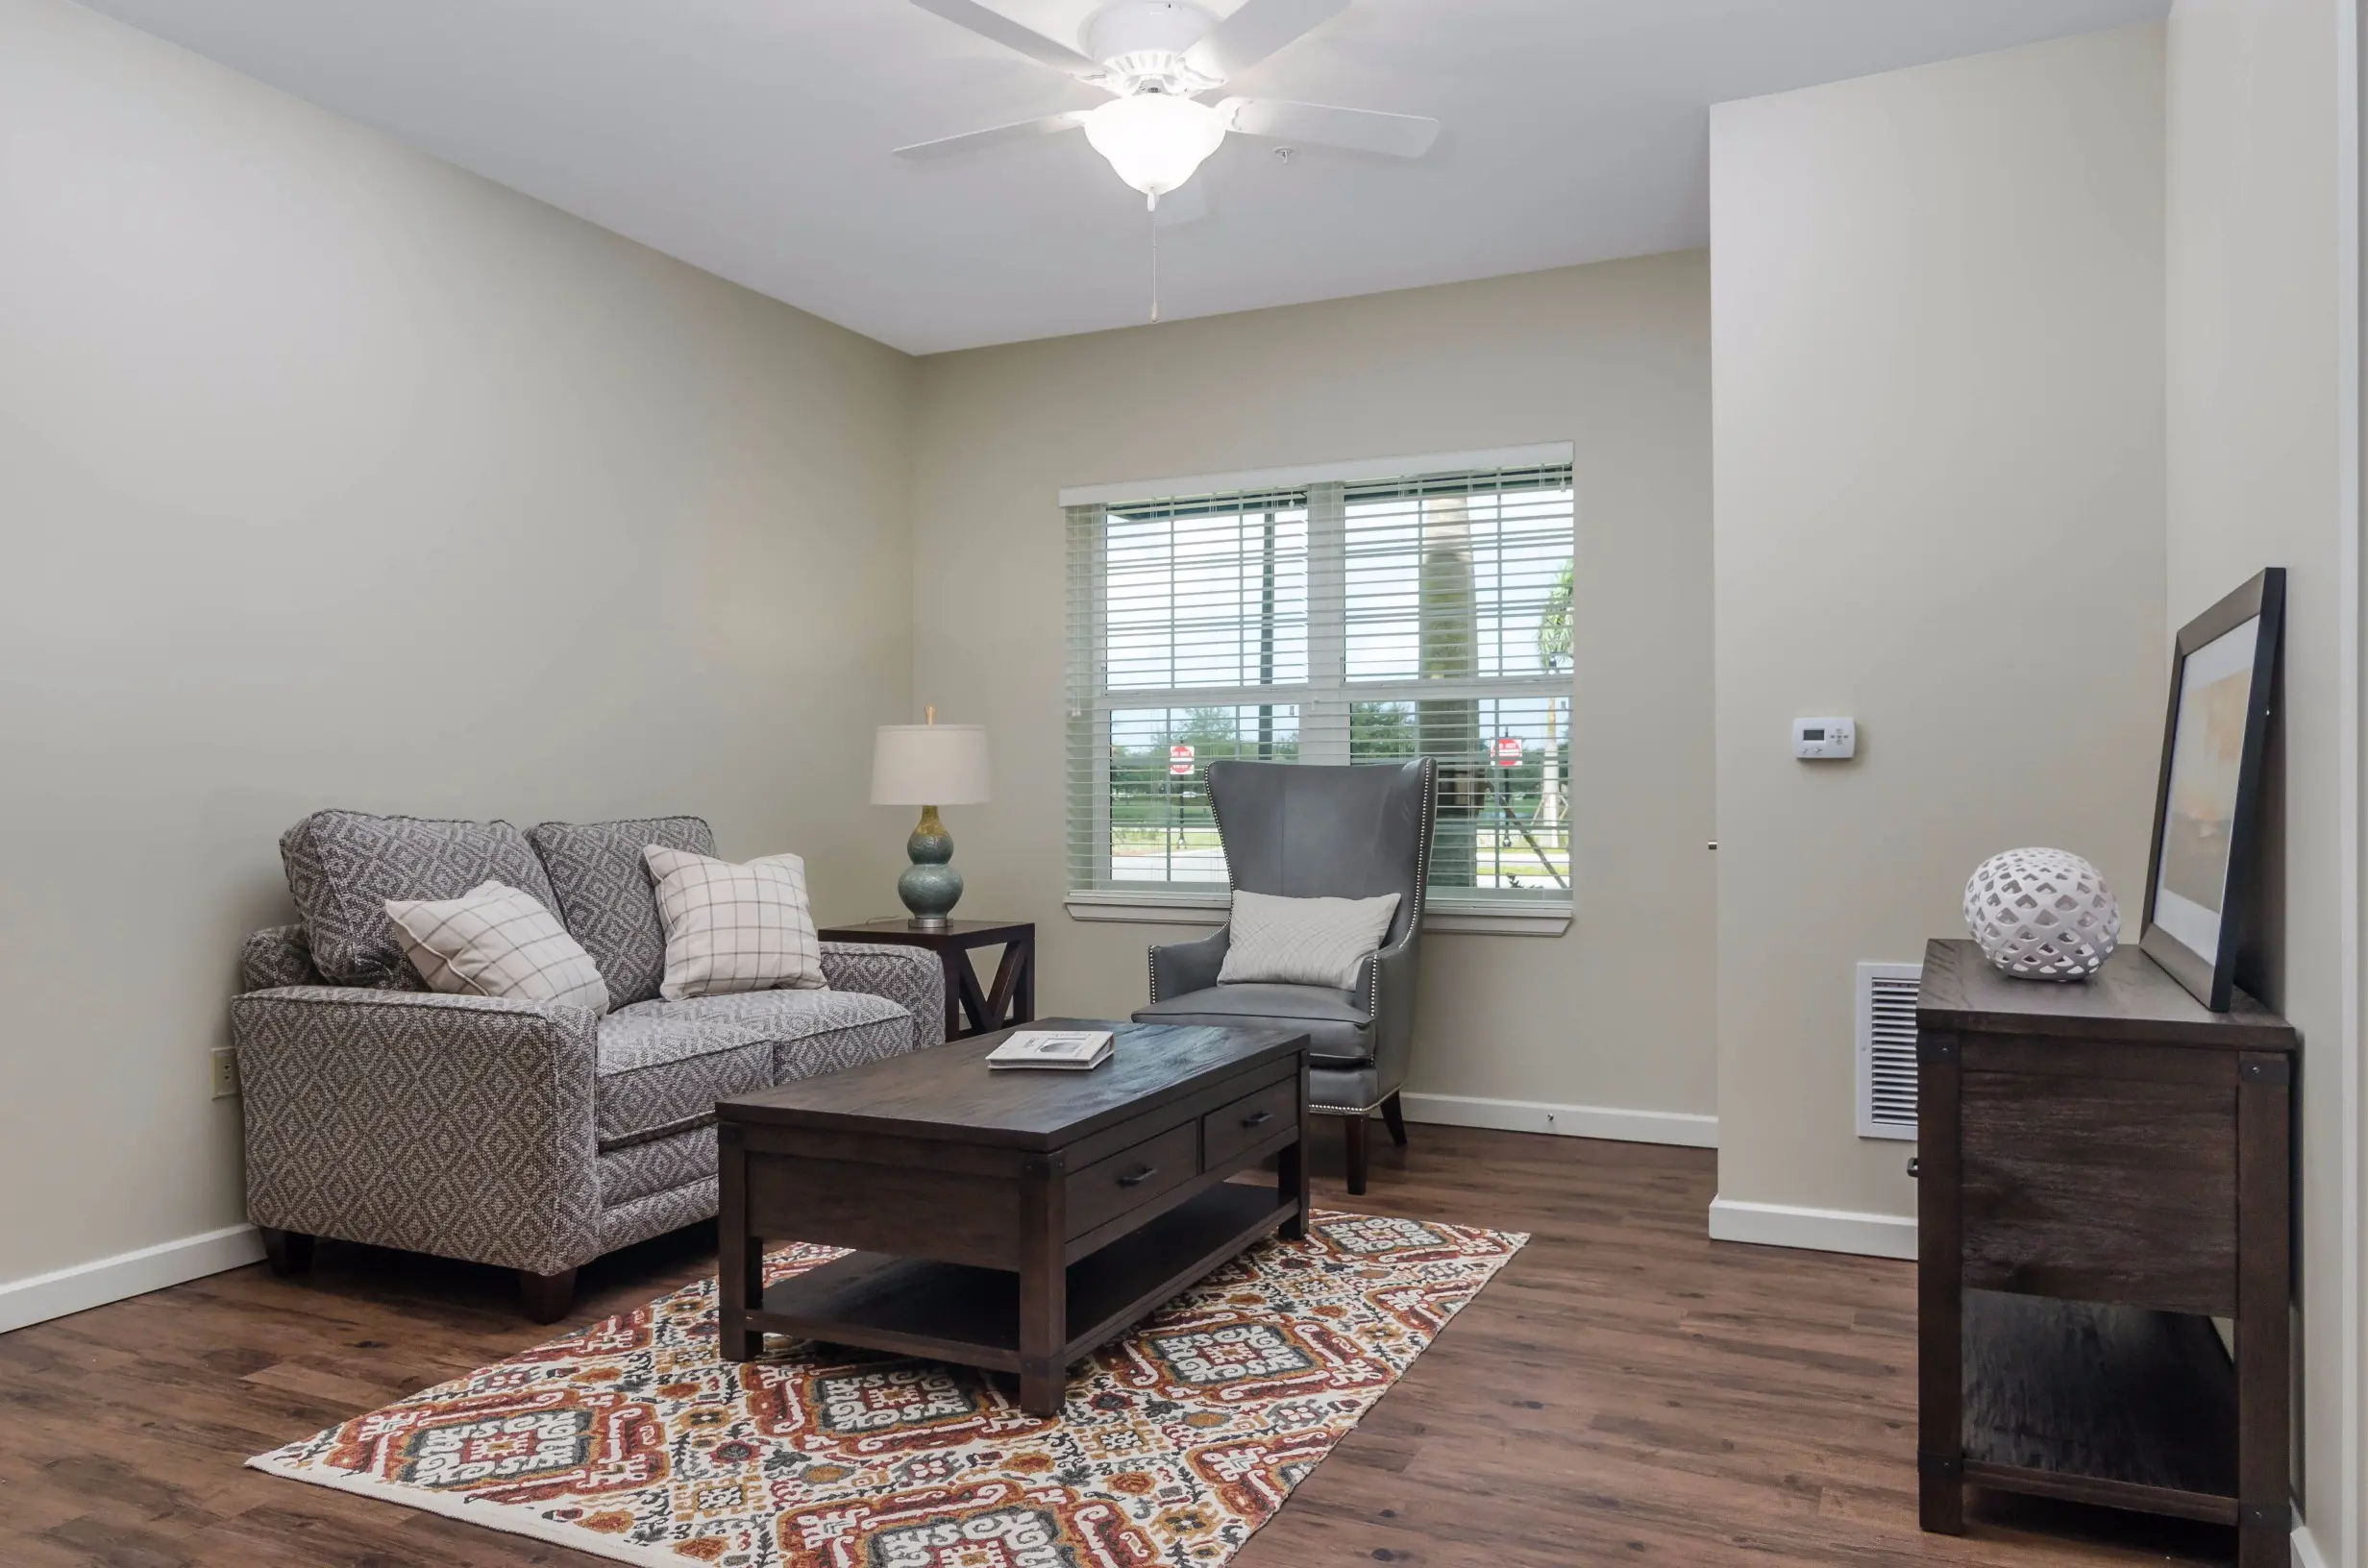 Family room of a senior apartment at American House Coconut Point, a senior living community in Estero, FL